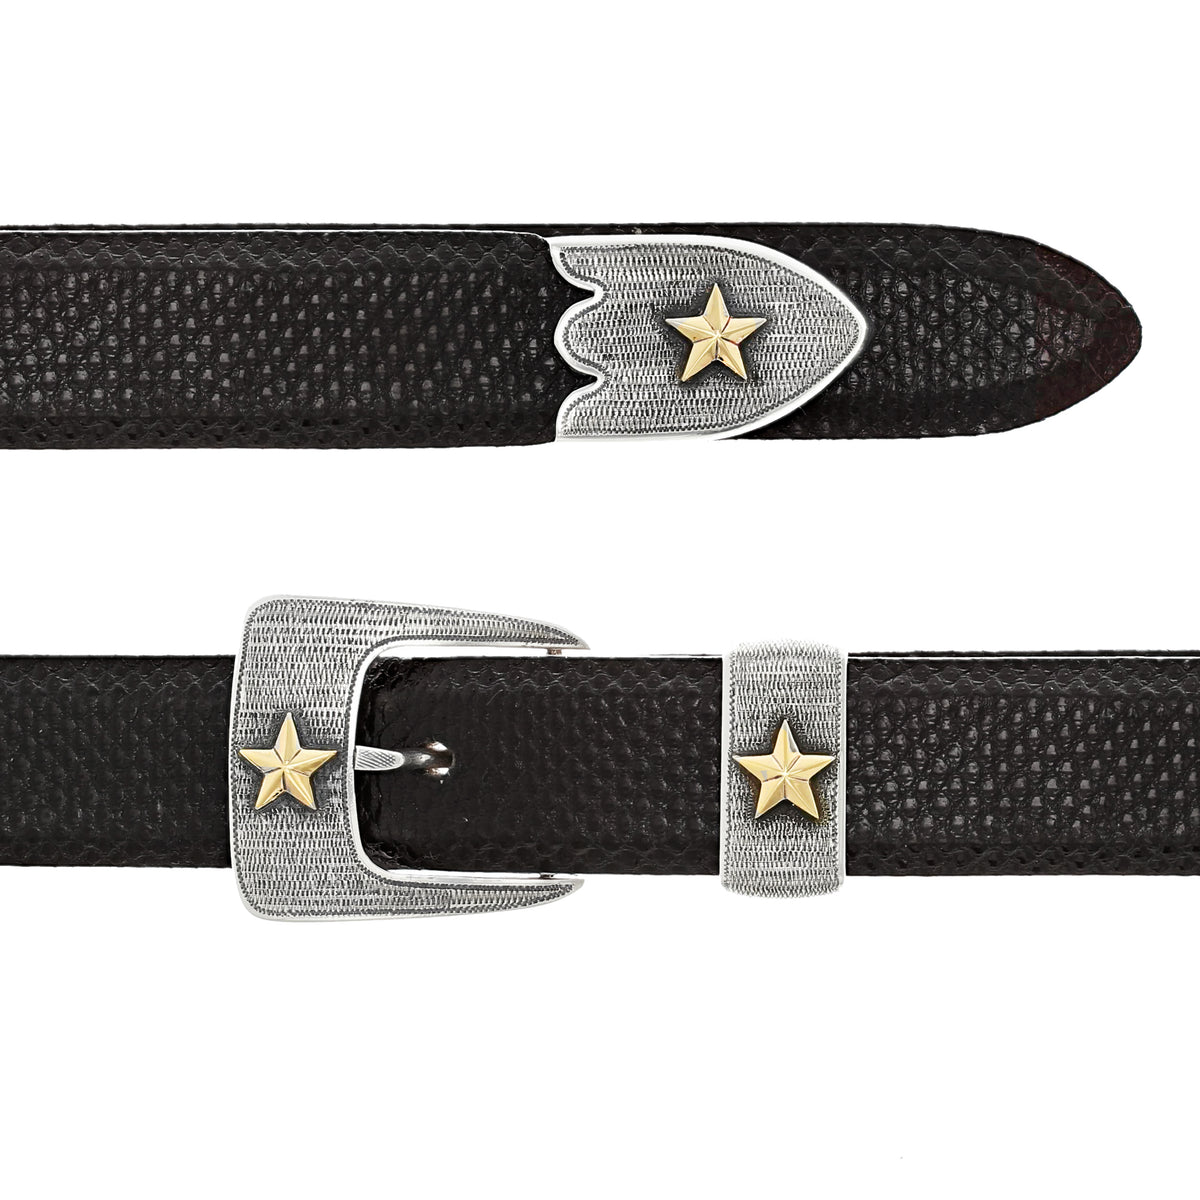 Clay 1702 Gold Star Buckle Set